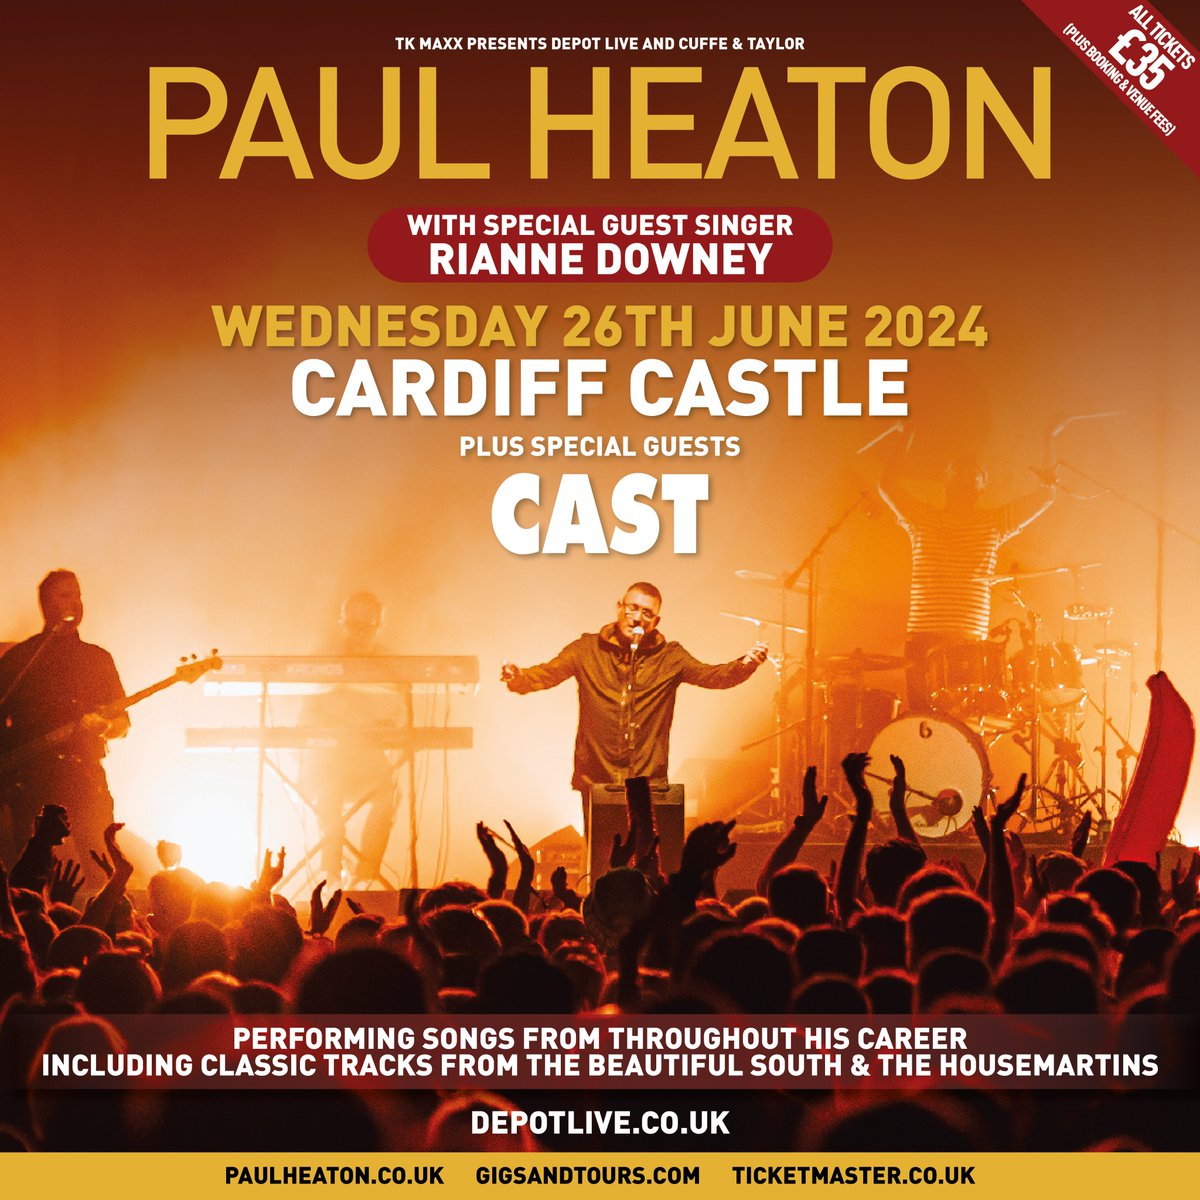 We're looking forward to joining the one and only @PaulHeatonSolo in Cardiff this June! Tickets are on sale now: ticketmaster.co.uk/event/1F00602A…